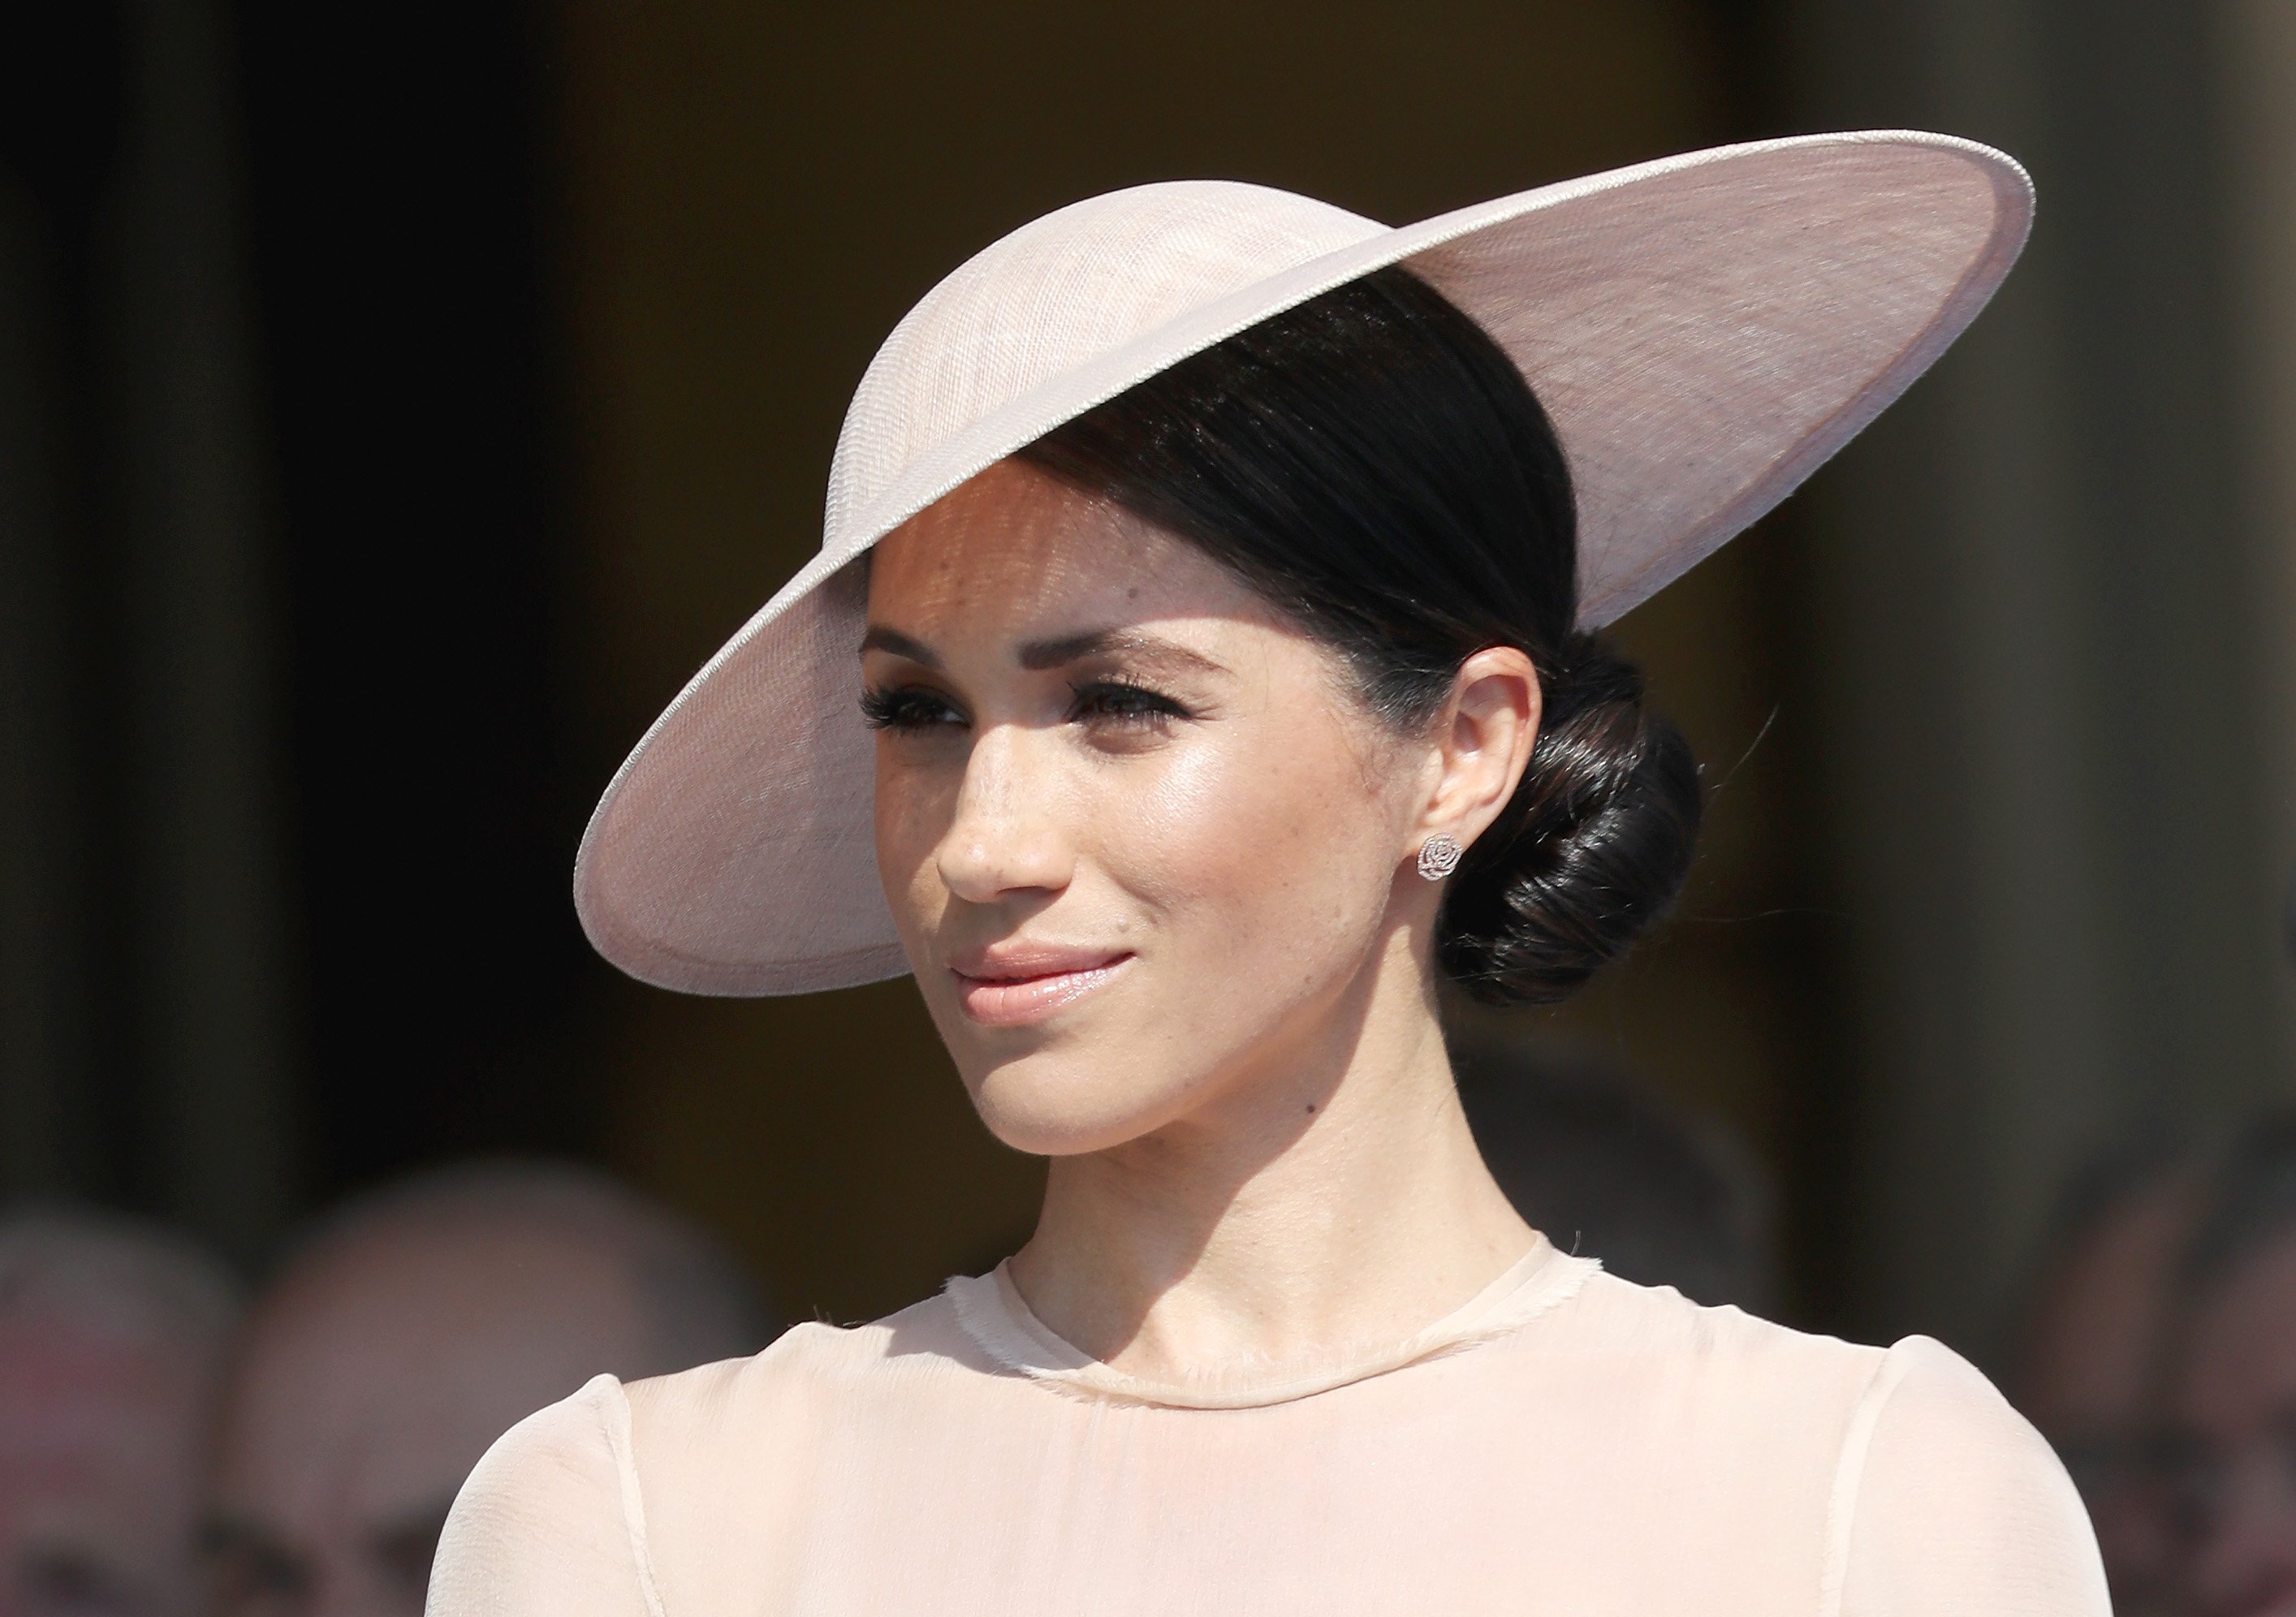 Meghan Markle attends Prince Charles' birthday celebration held at Buckingham Palace on May 22, 2018 in London, England | Photo: Getty Images